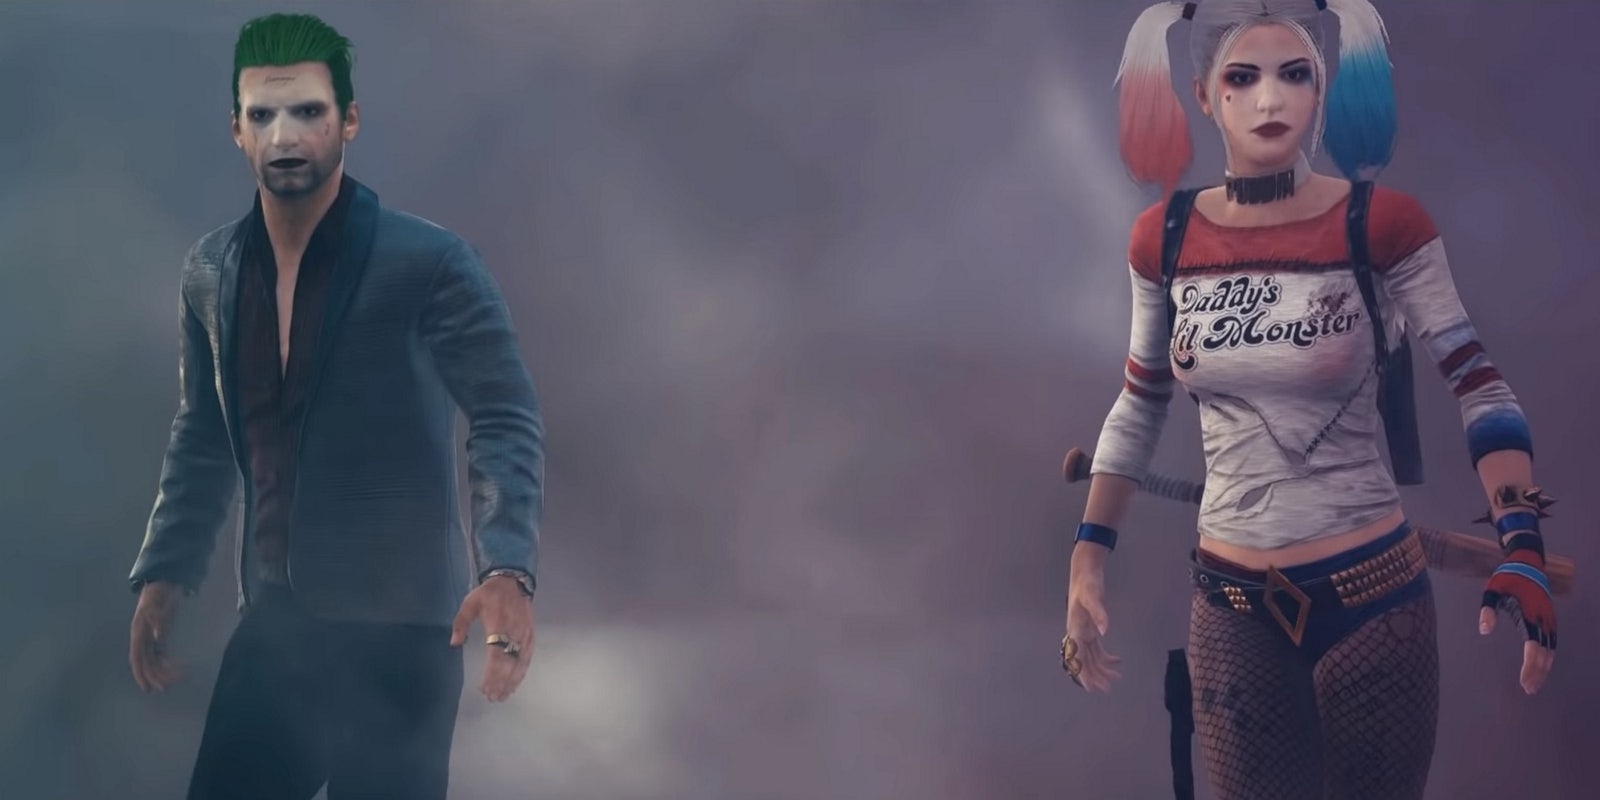 Suicide Squad's Joker and Harley Quinn are coming to PUBG